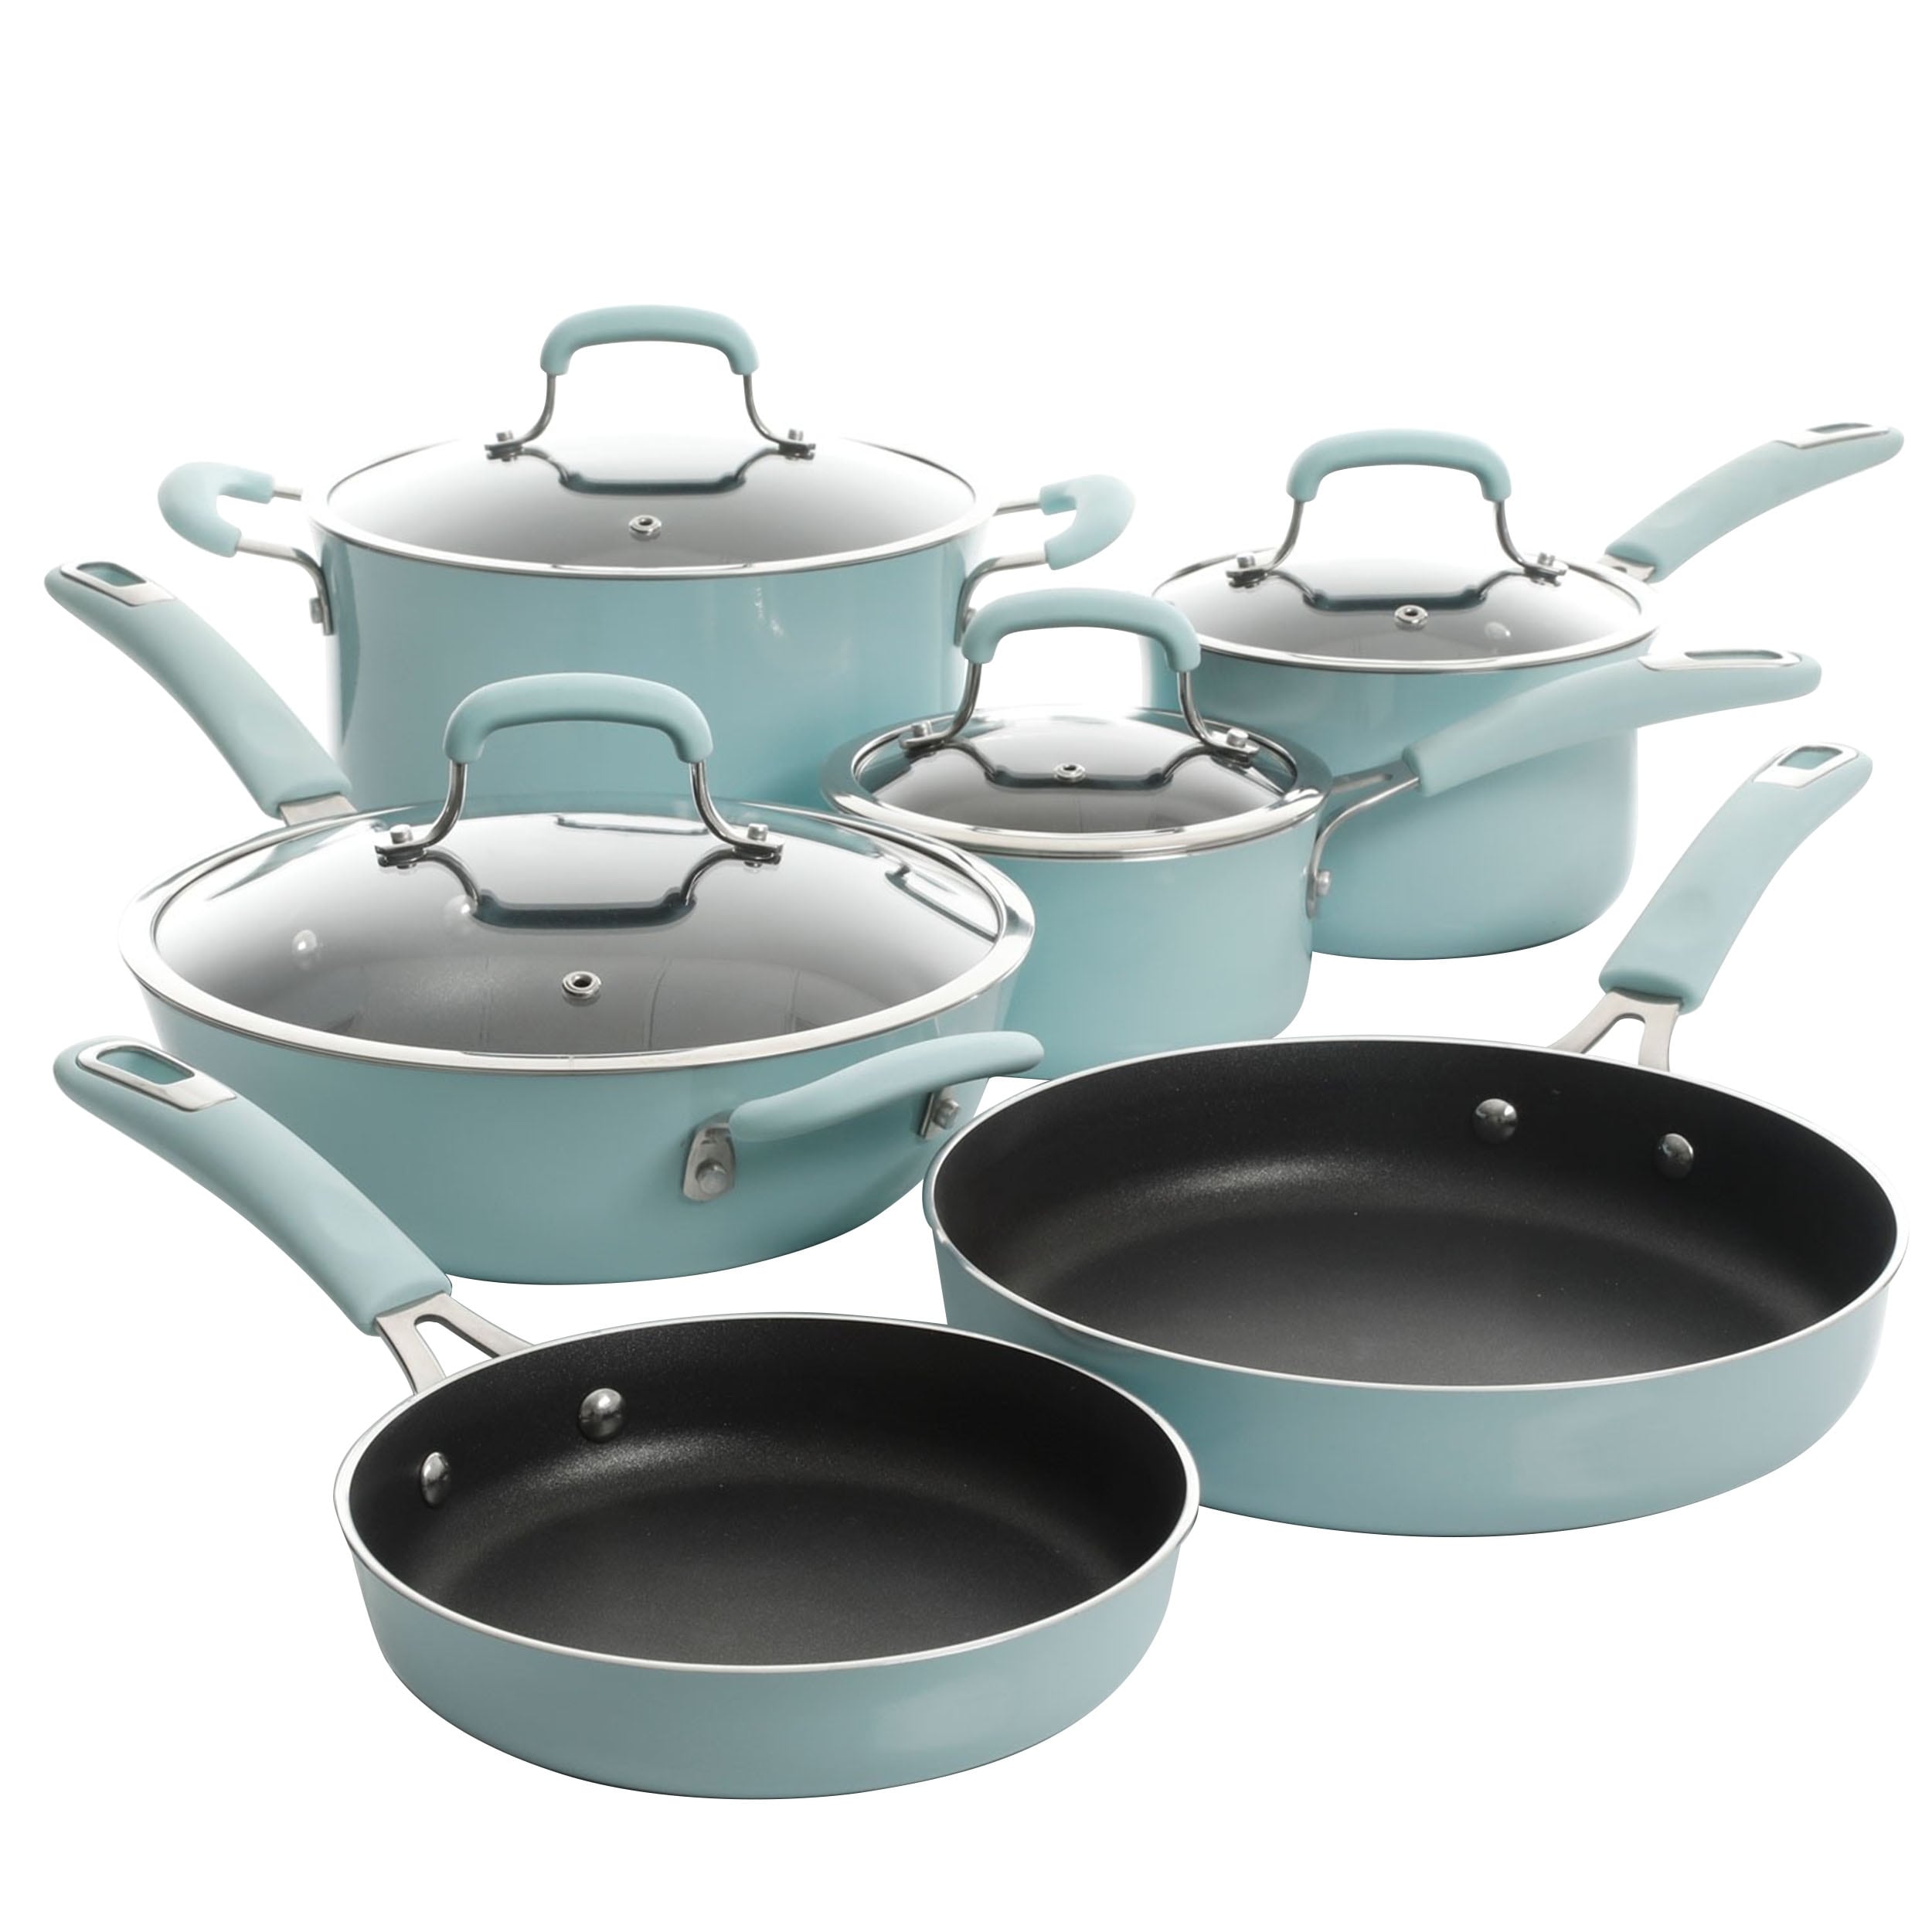 https://ak1.ostkcdn.com/images/products/is/images/direct/744b008a75eba2a7cae4f10be09ede4e5624c23d/Nonstick-Aluminum-Cookware-10-Piece-Set-in-Arctic-Blue.jpg